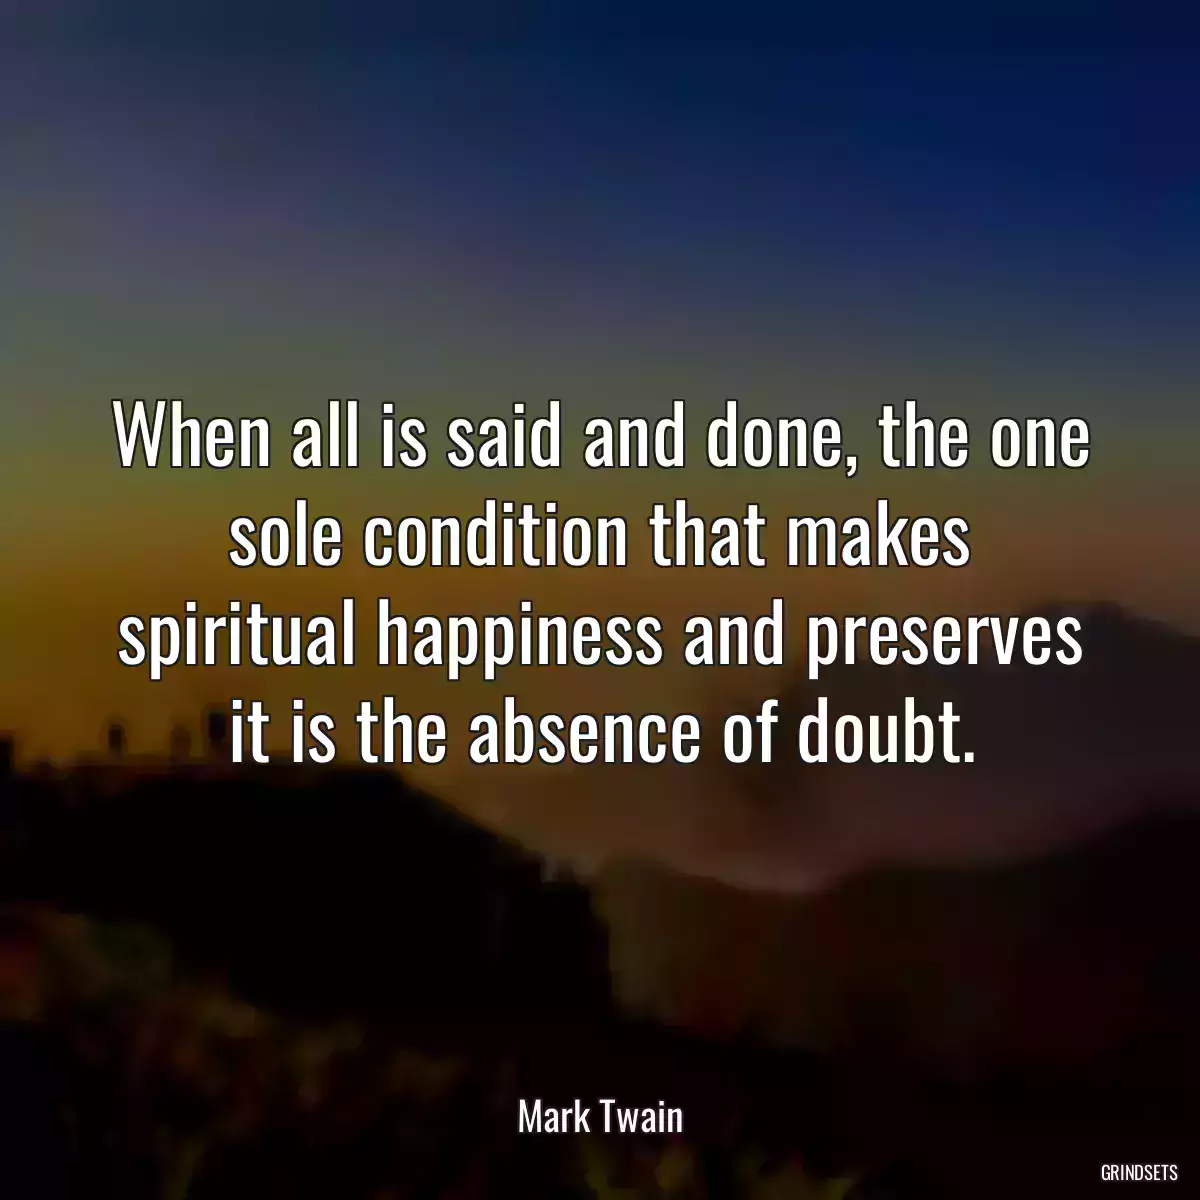 When all is said and done, the one sole condition that makes spiritual happiness and preserves it is the absence of doubt.